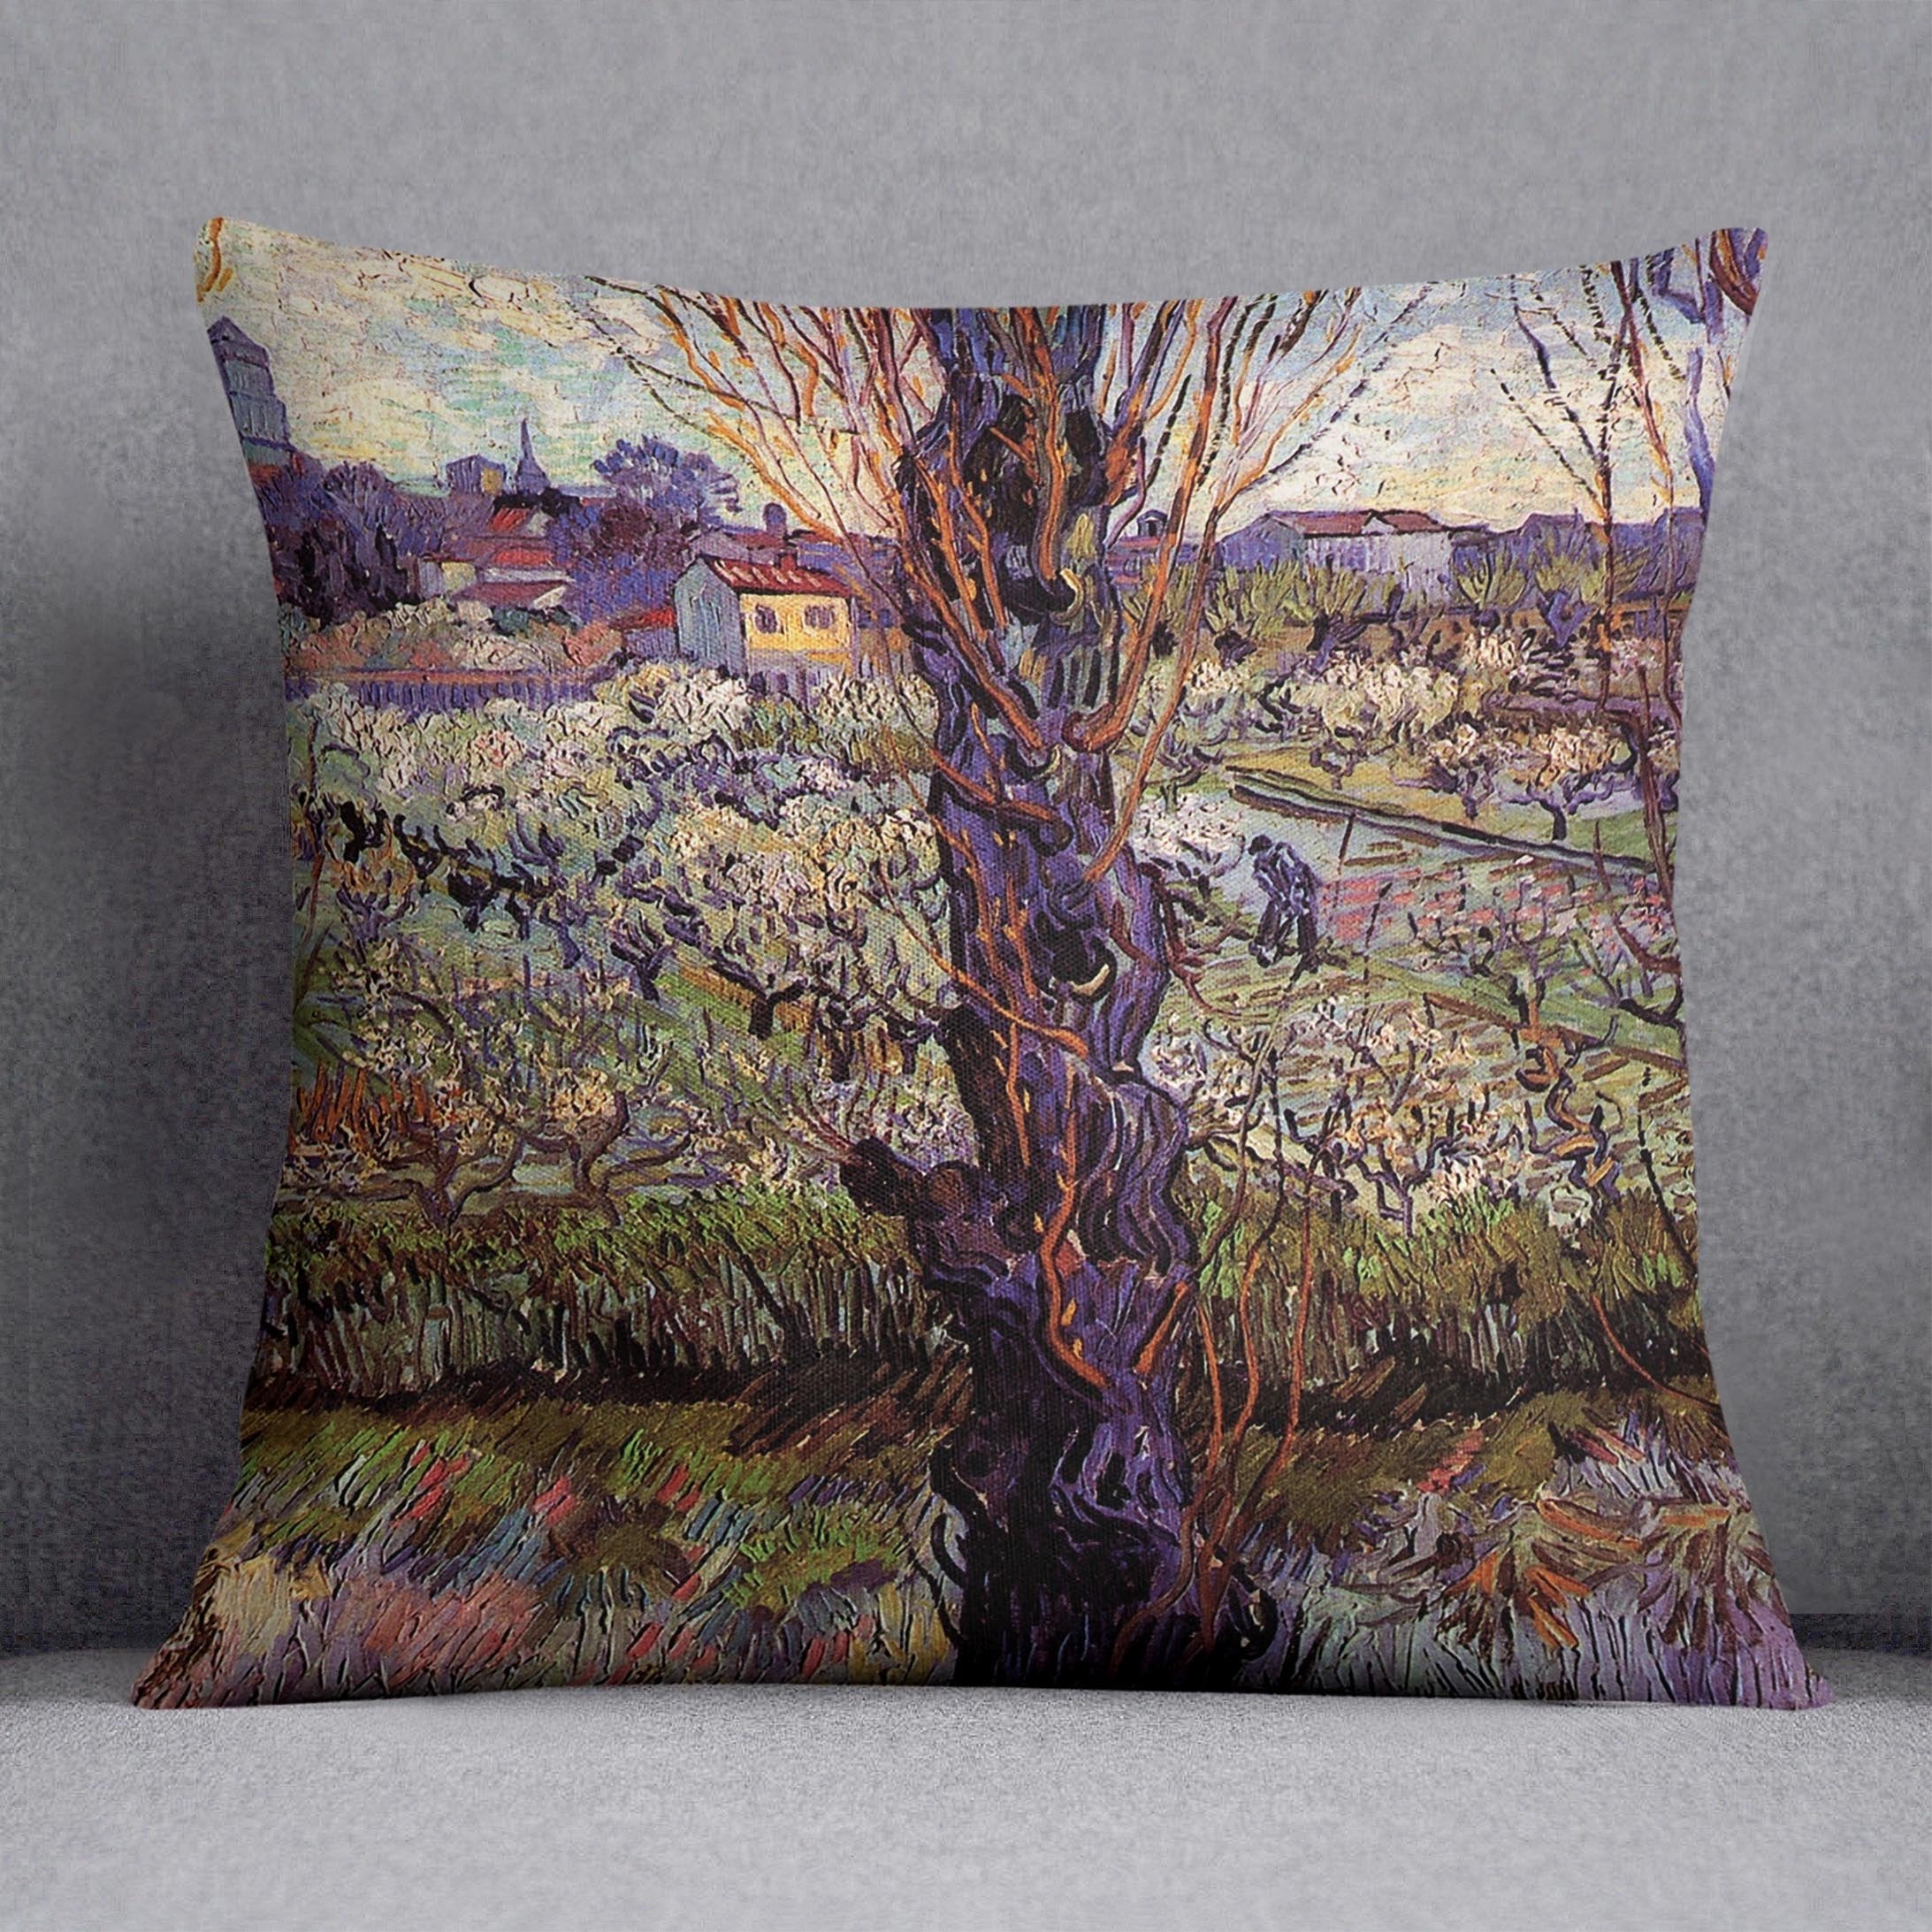 Orchard in Blossom with View of Arles by Van Gogh Throw Pillow